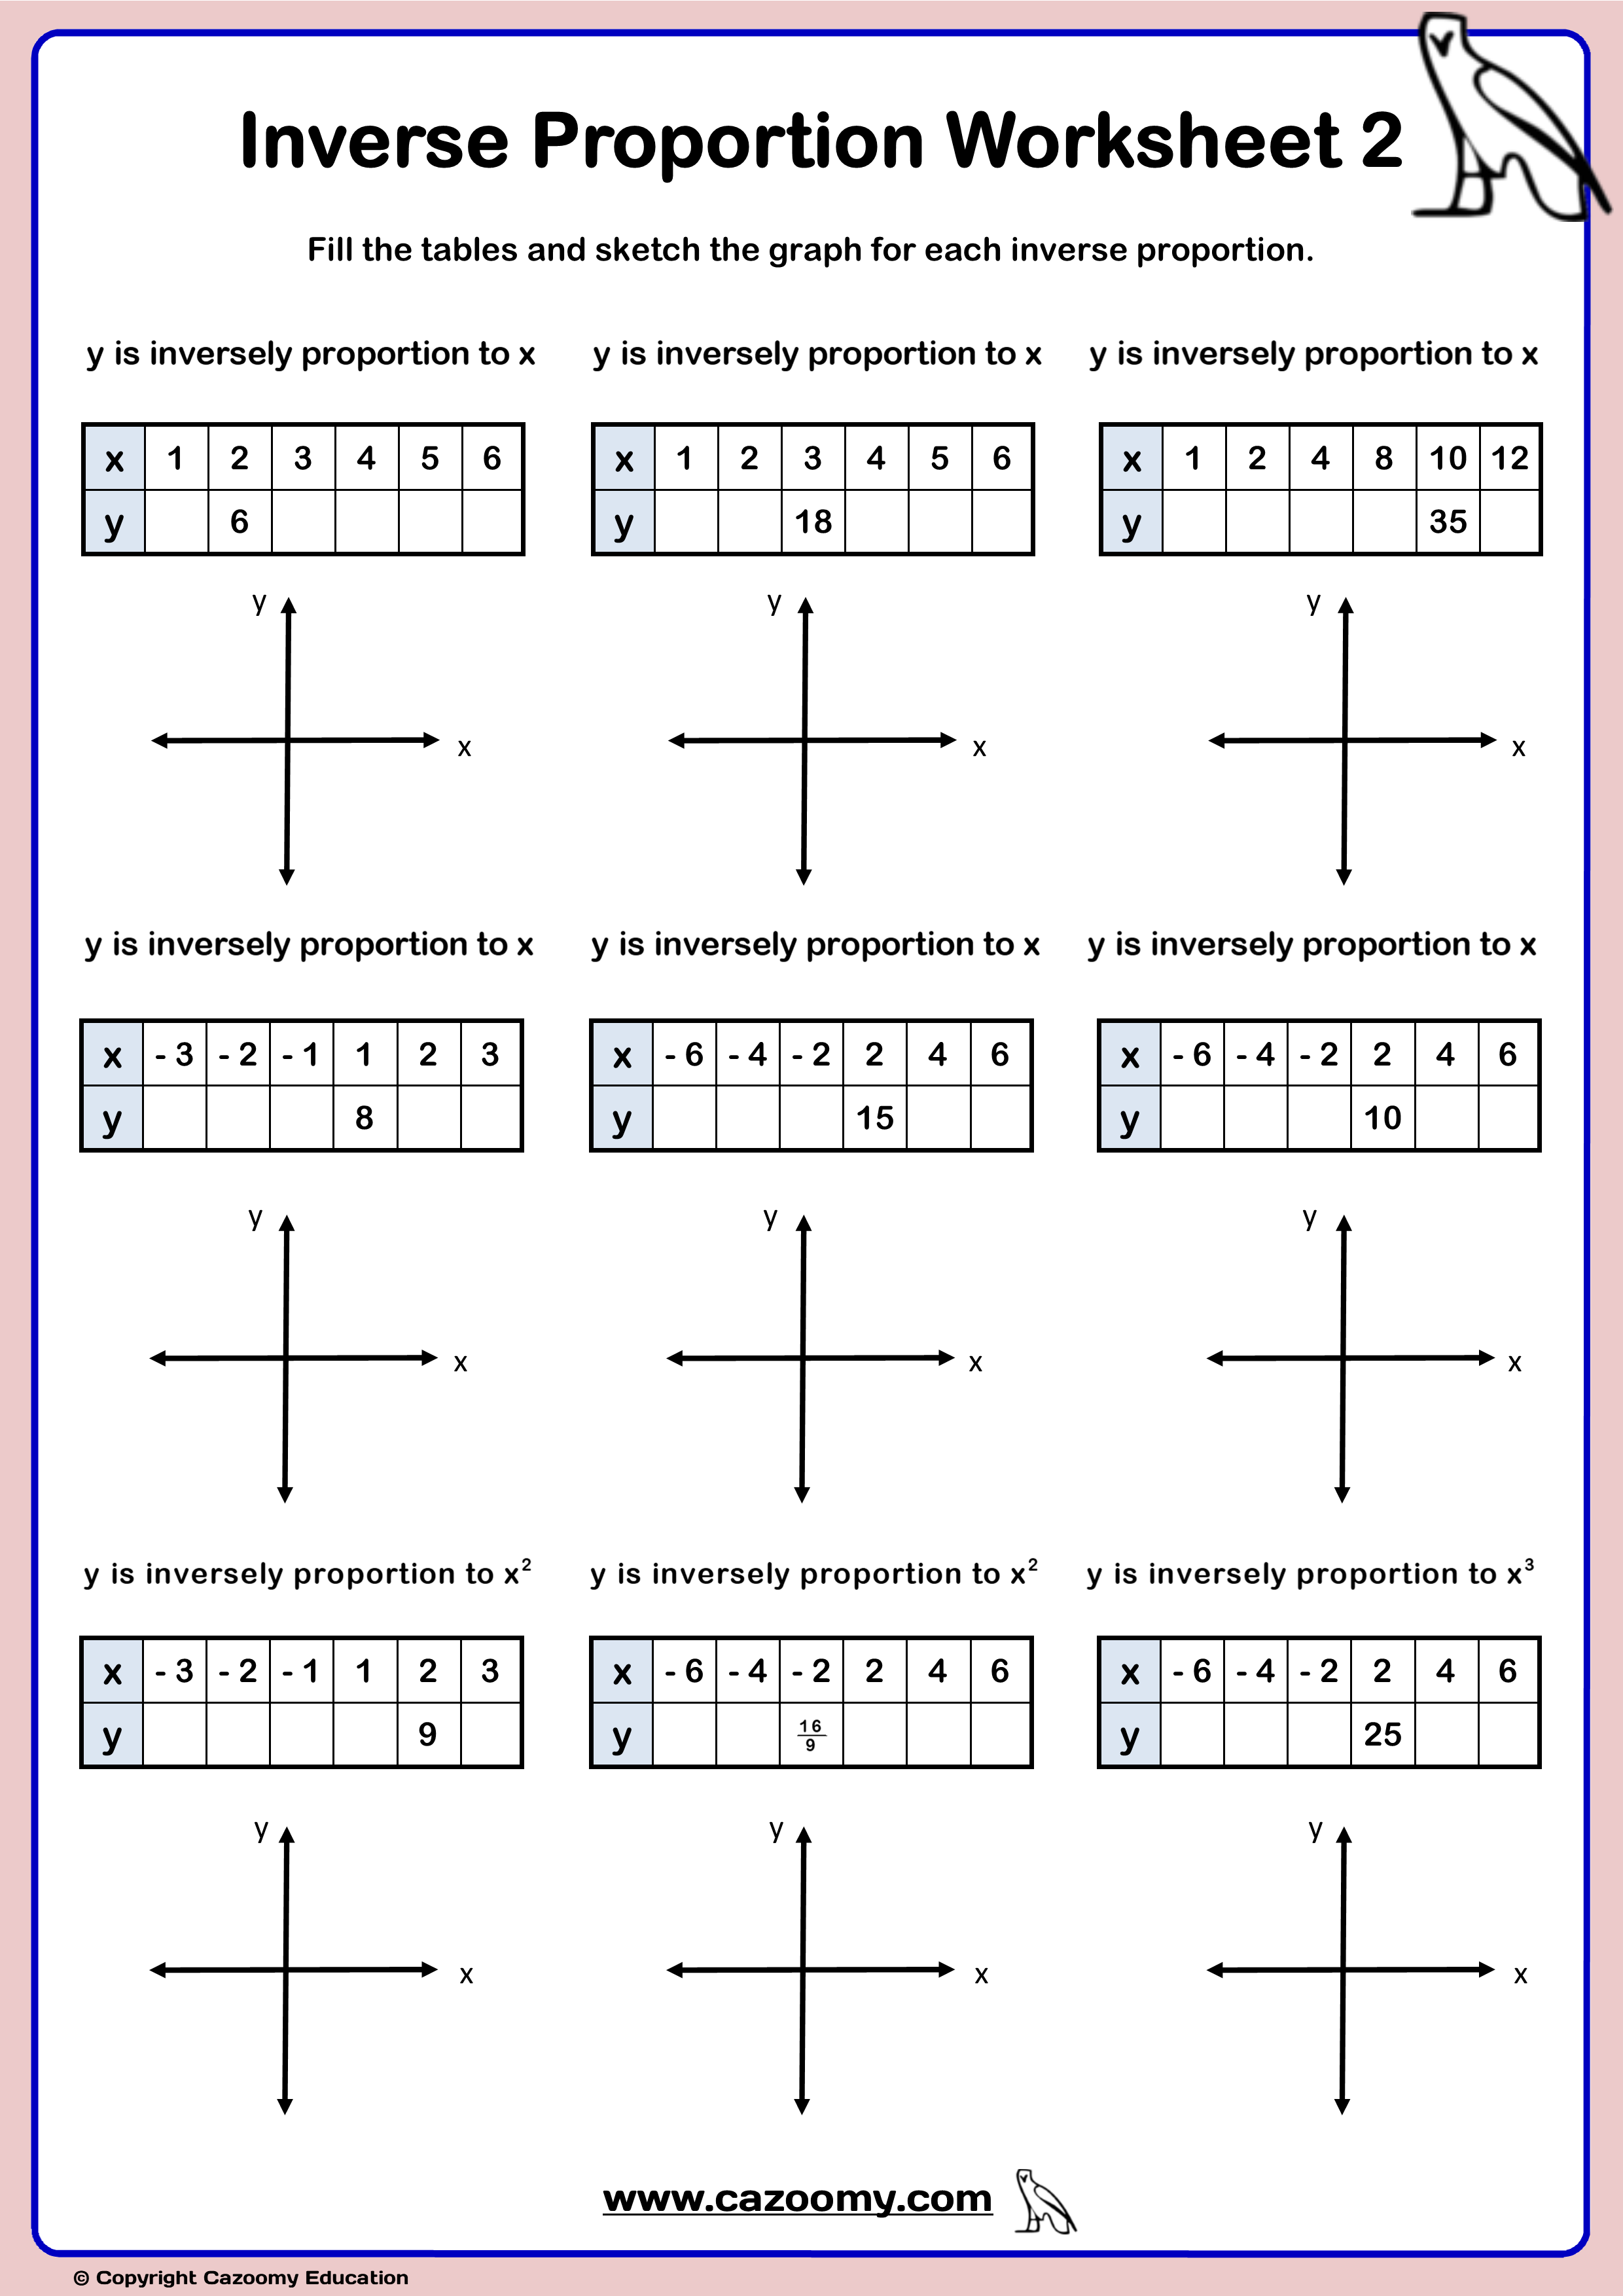 Inverse Proportion Worksheets - New & Engaging  Cazoomy Within Constant Of Proportionality Worksheet